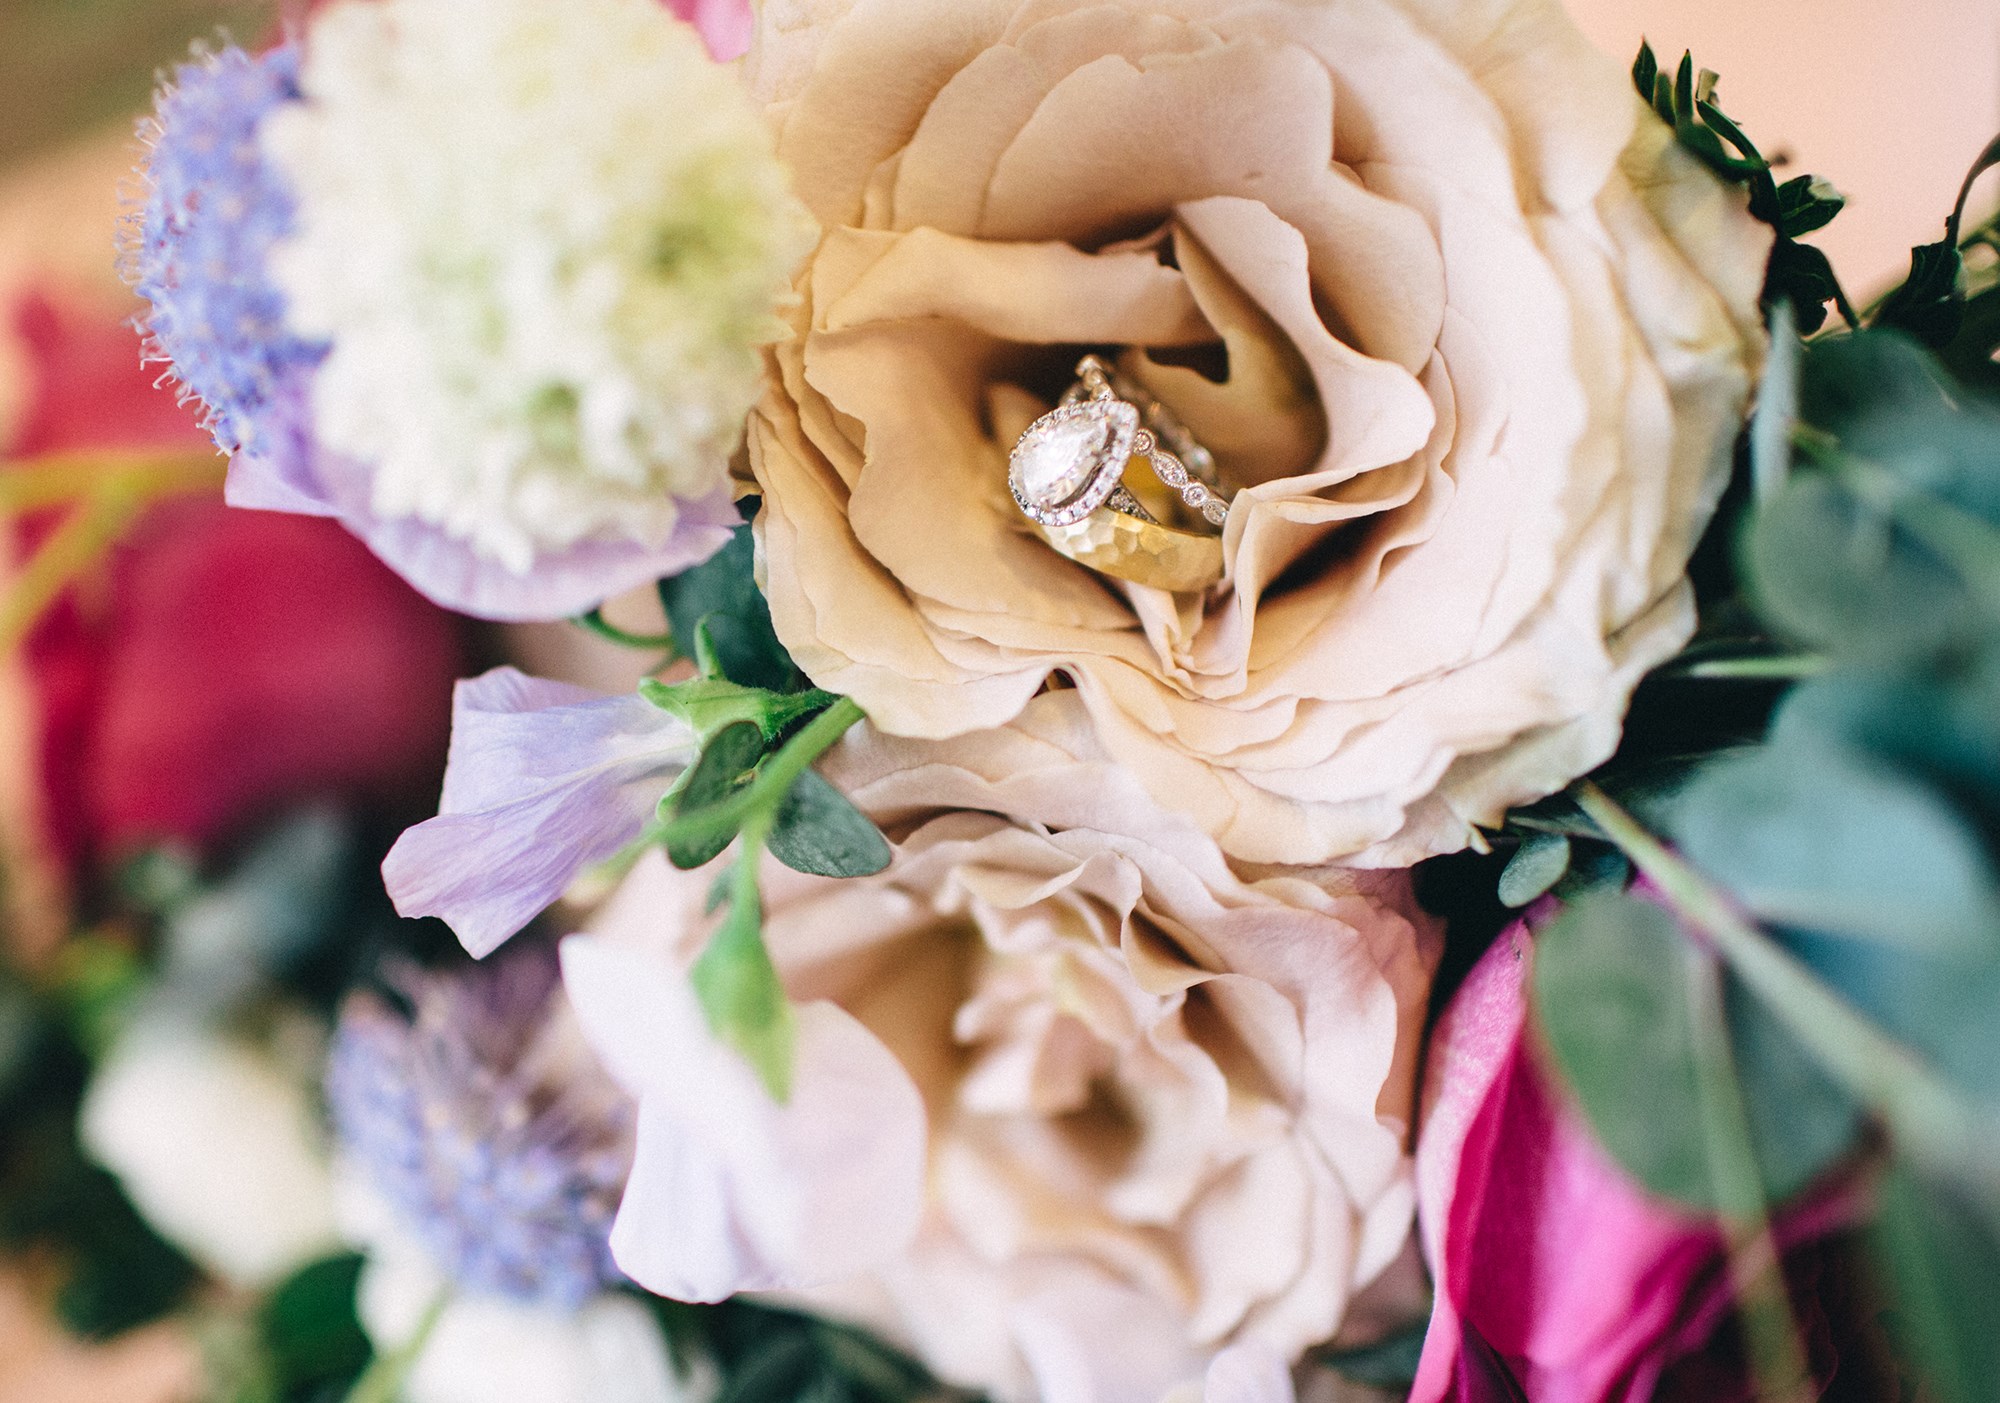 pear shaped engagement ring on bouquet